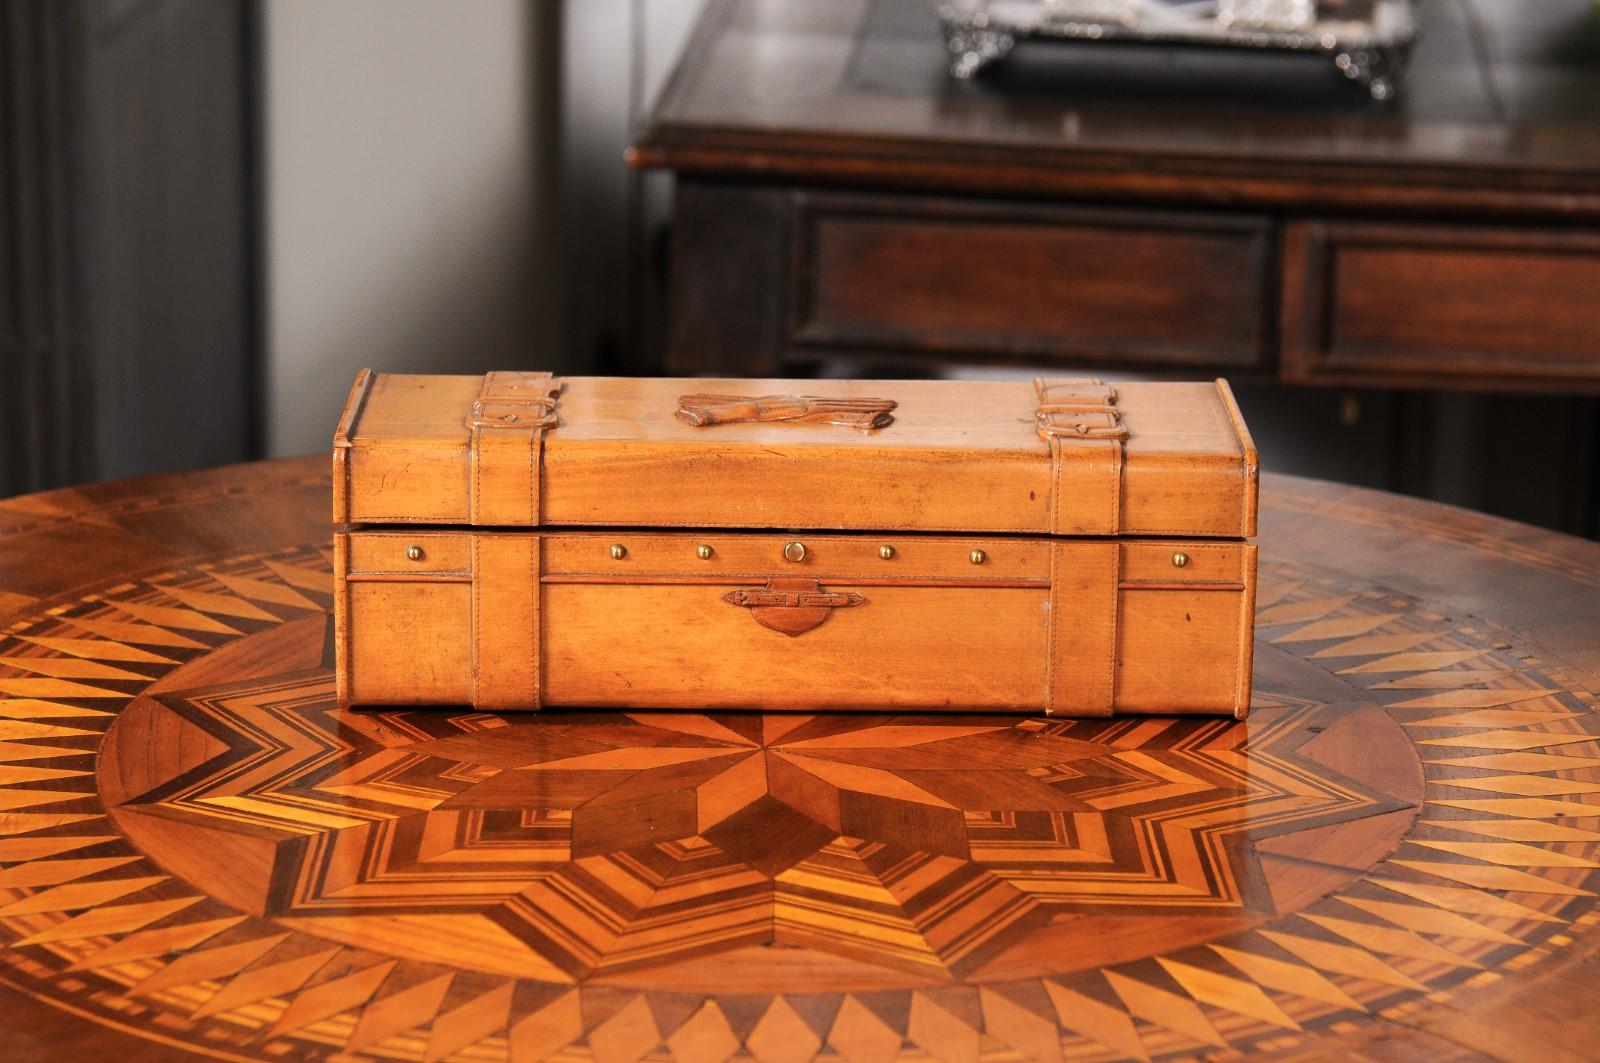 French 19th Century Cherry and Brass Glove Box with Low-Relief Carved Motifs For Sale 9